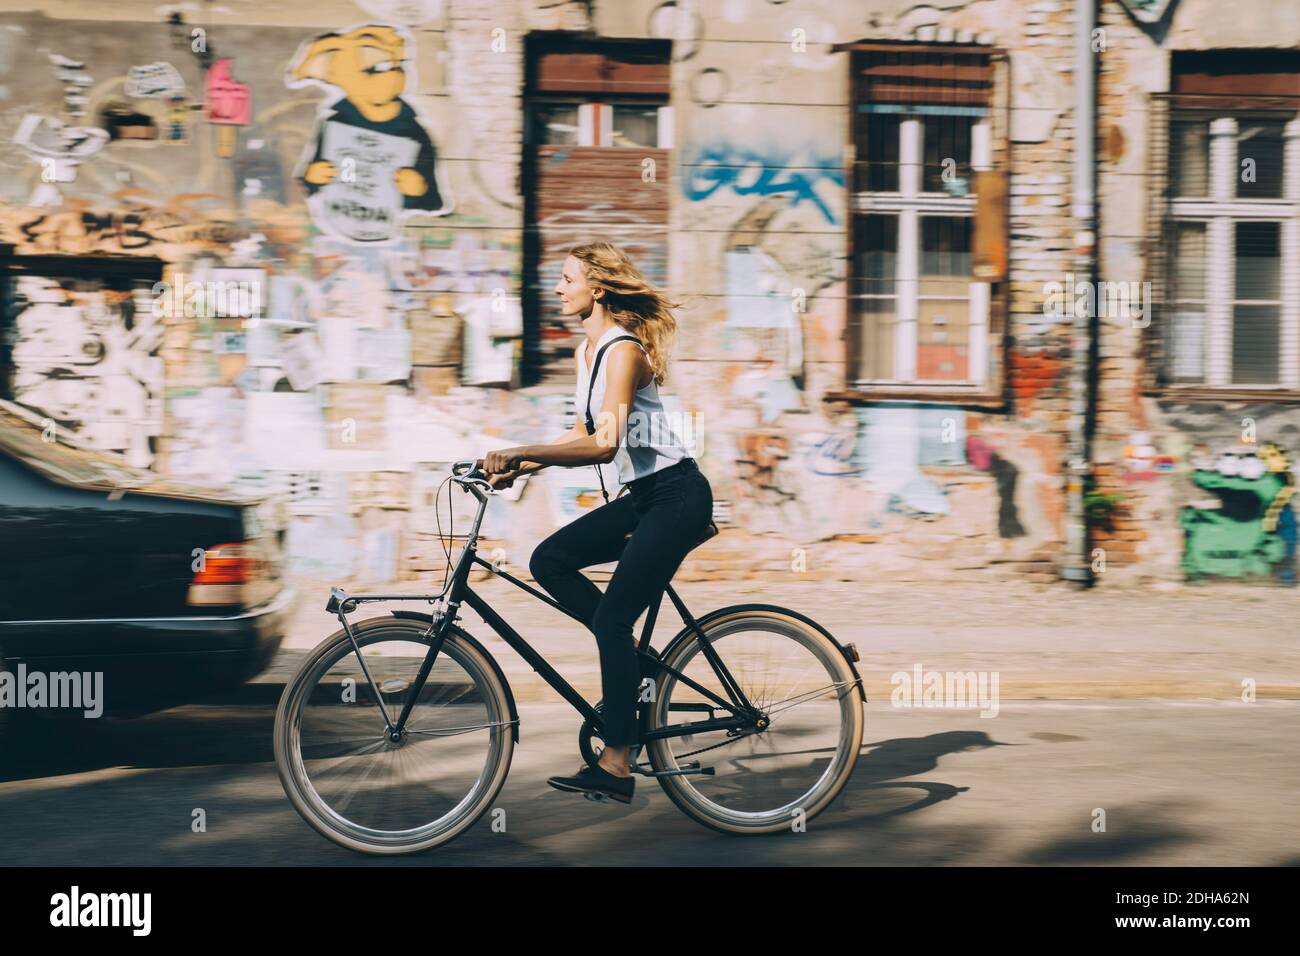 Side view of young businesswoman riding bicycle against building in city Stock Photo